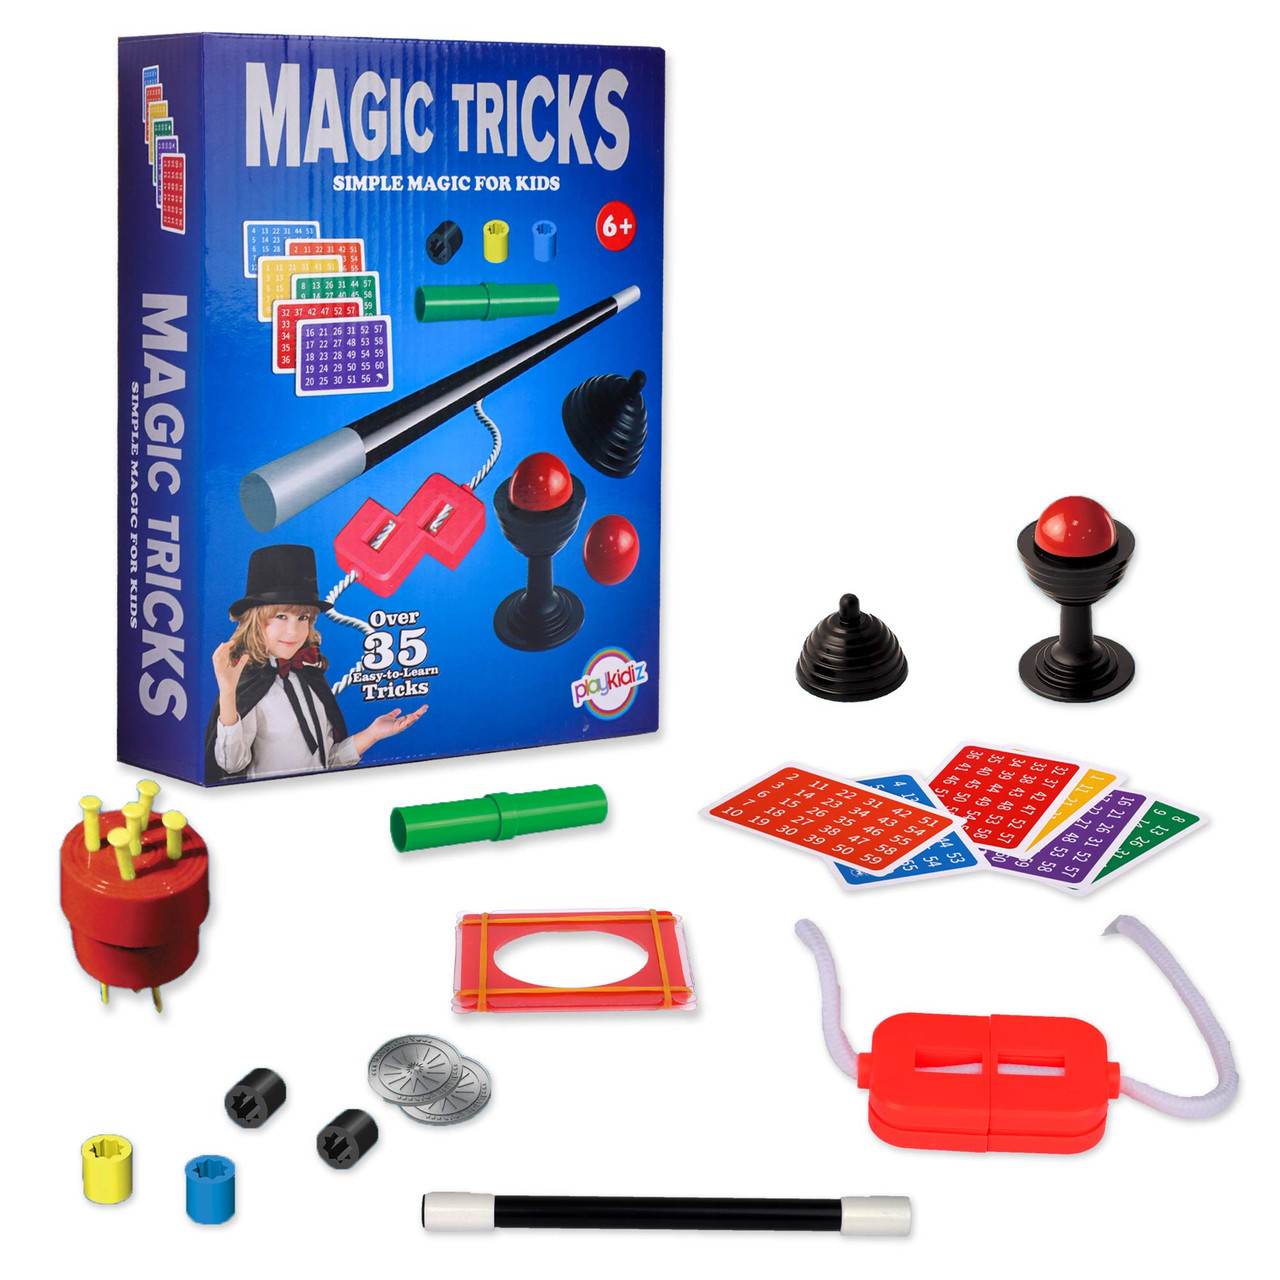 Easy Magic Tricks That Anyone Can Do At Home - Tricks for Beginners - Card  Change, Vanish, Transform 